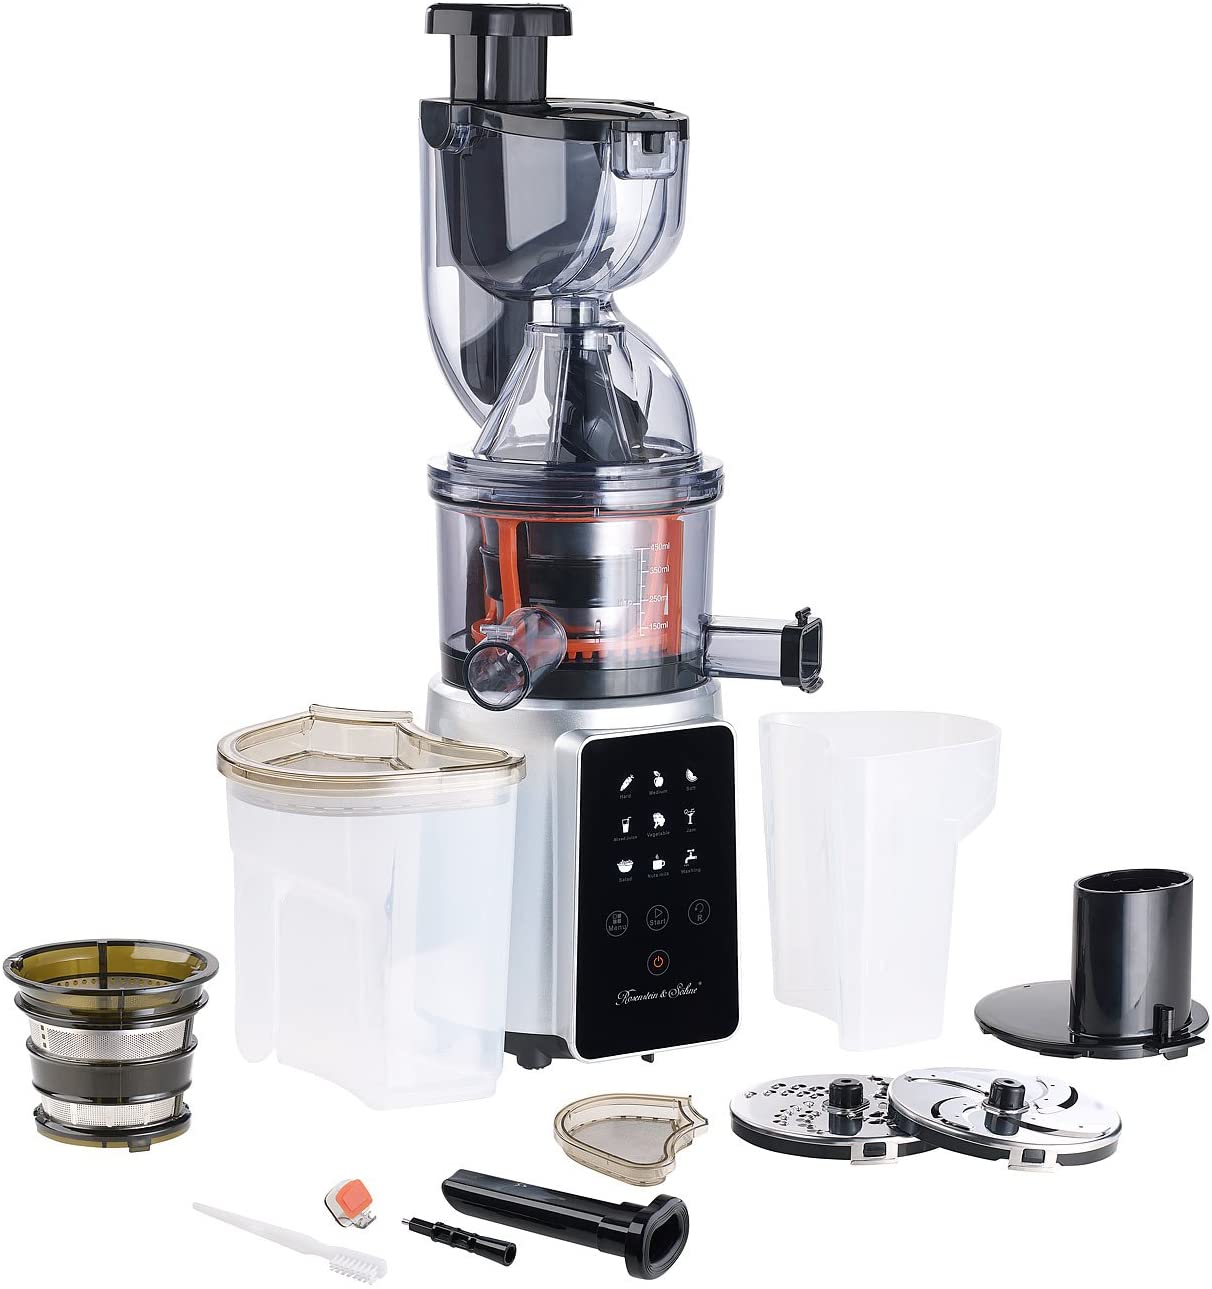 ROSENSTEIN & SOHNE Rosenstein & Söhne Juice Machine 3-in-1 Slow Juicer & Vegetable Grater and Ice Attachment 200 (Electric Slow Juicer)